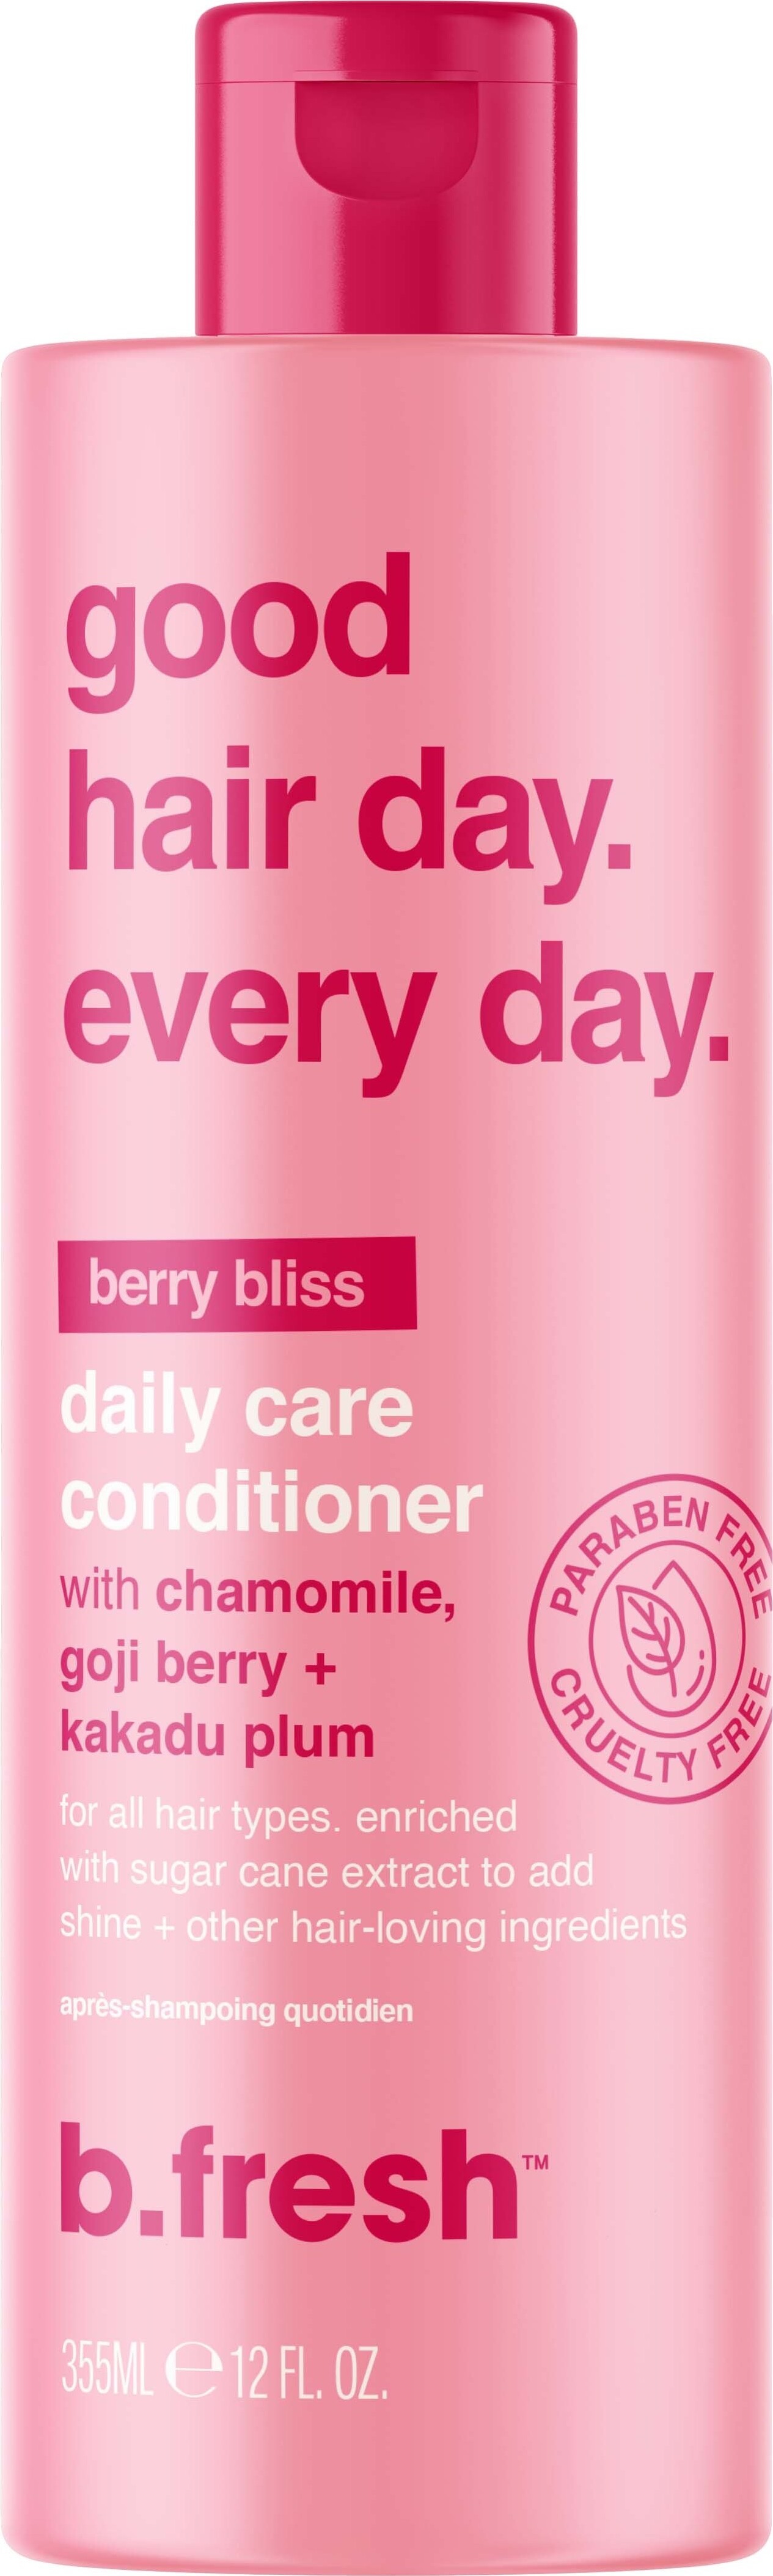 B.fresh - Good Hair Day Every Day Daily Care Conditioner 355 Ml